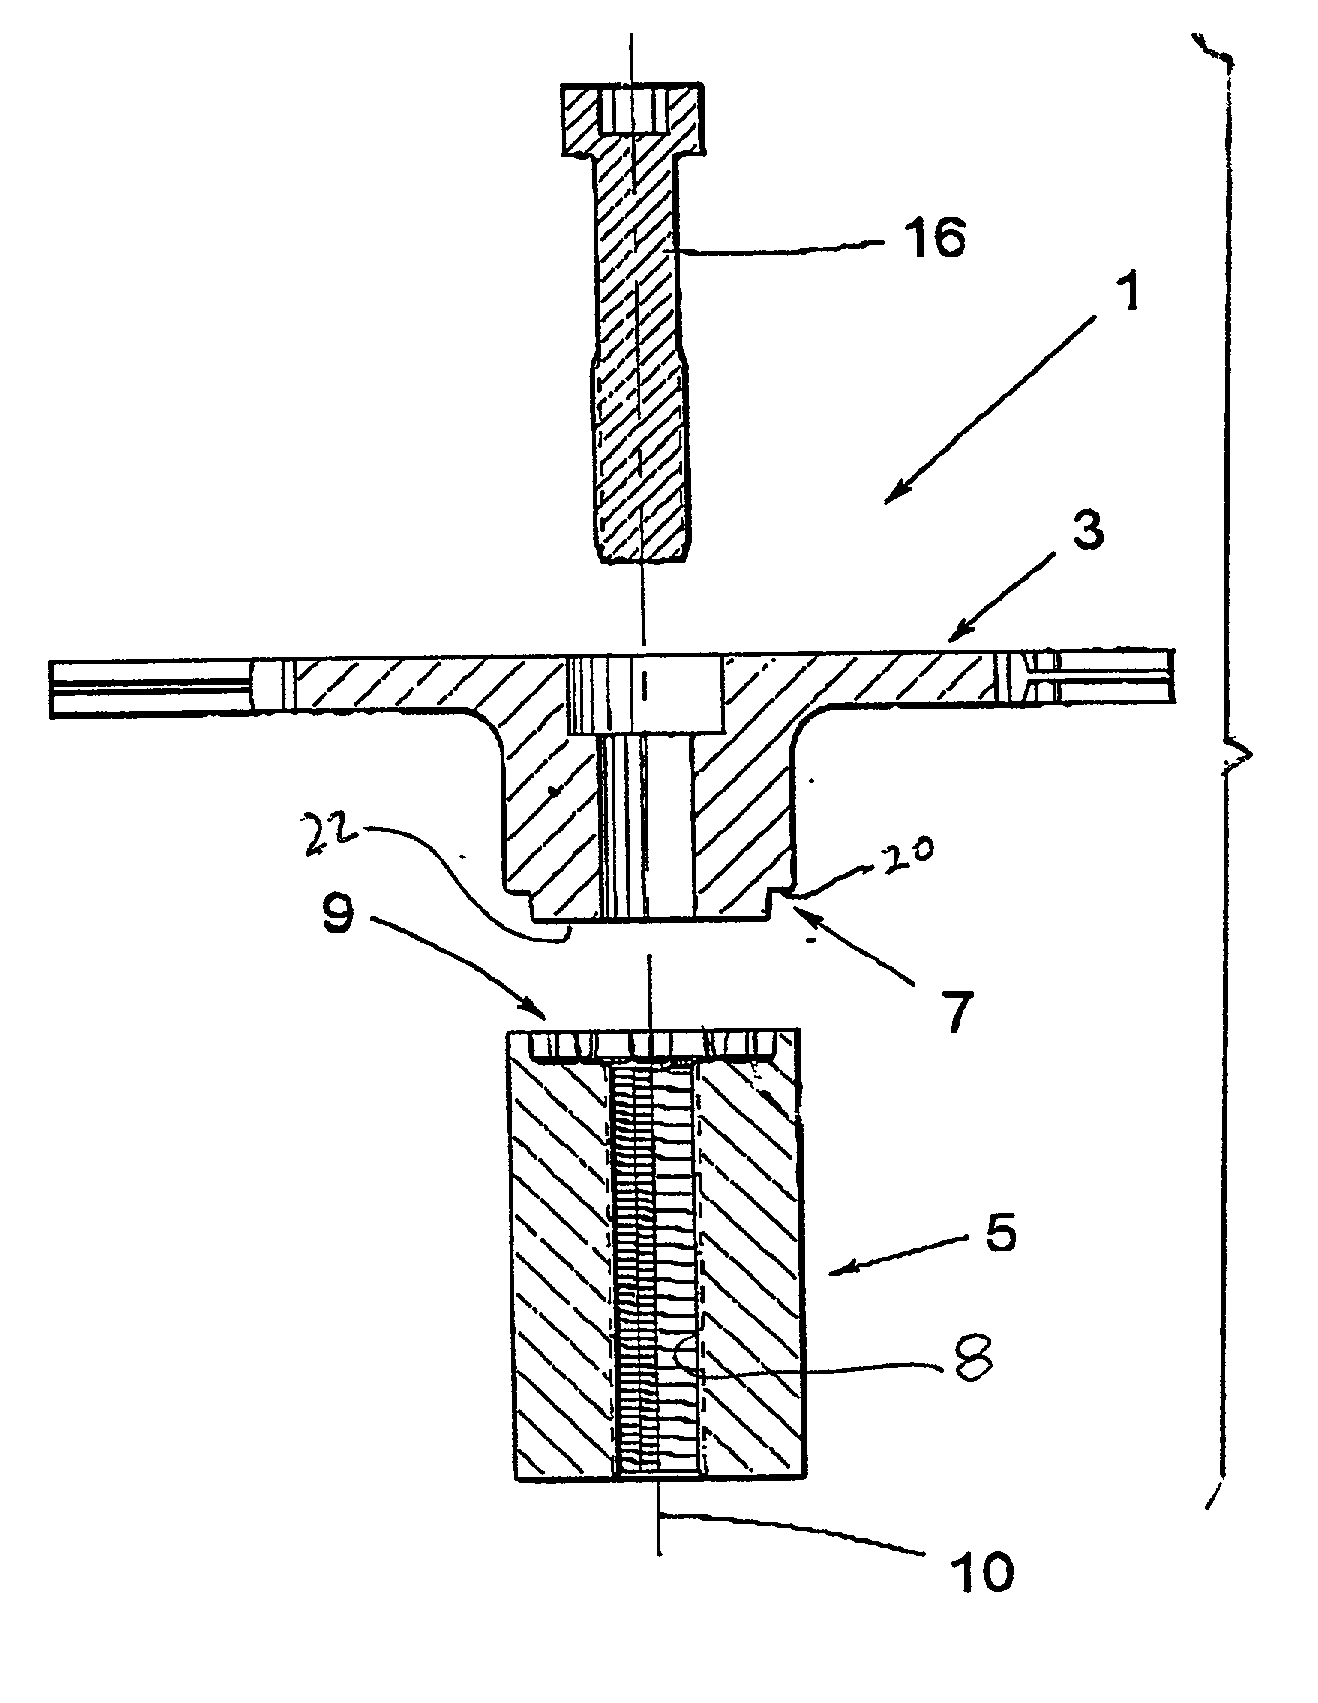 Toothed tool coupling for rotating a rotary tool